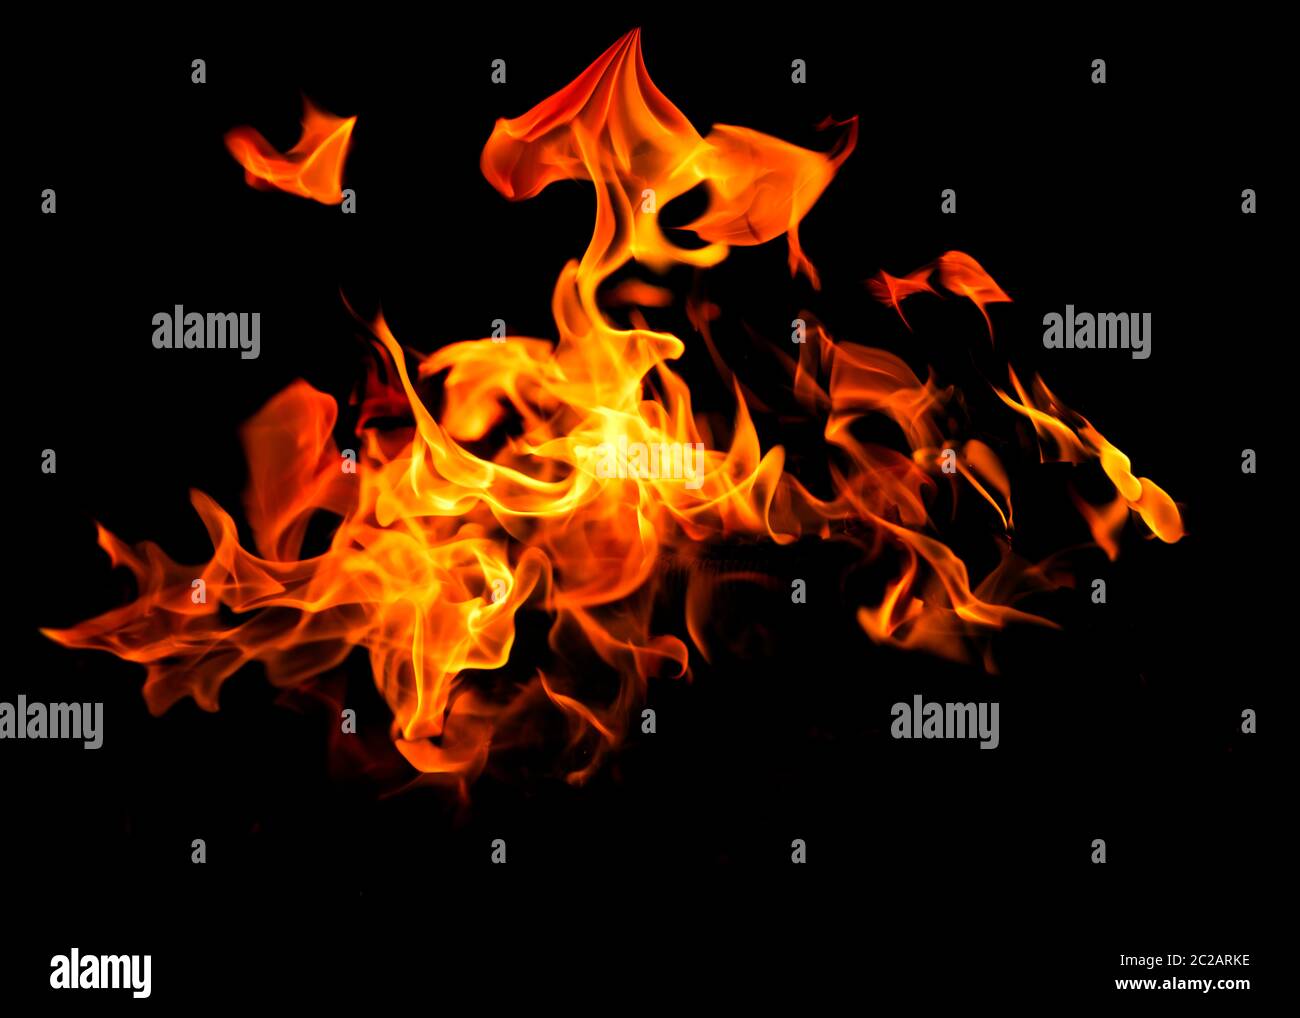 Fire flames isolated on black background Stock Photo